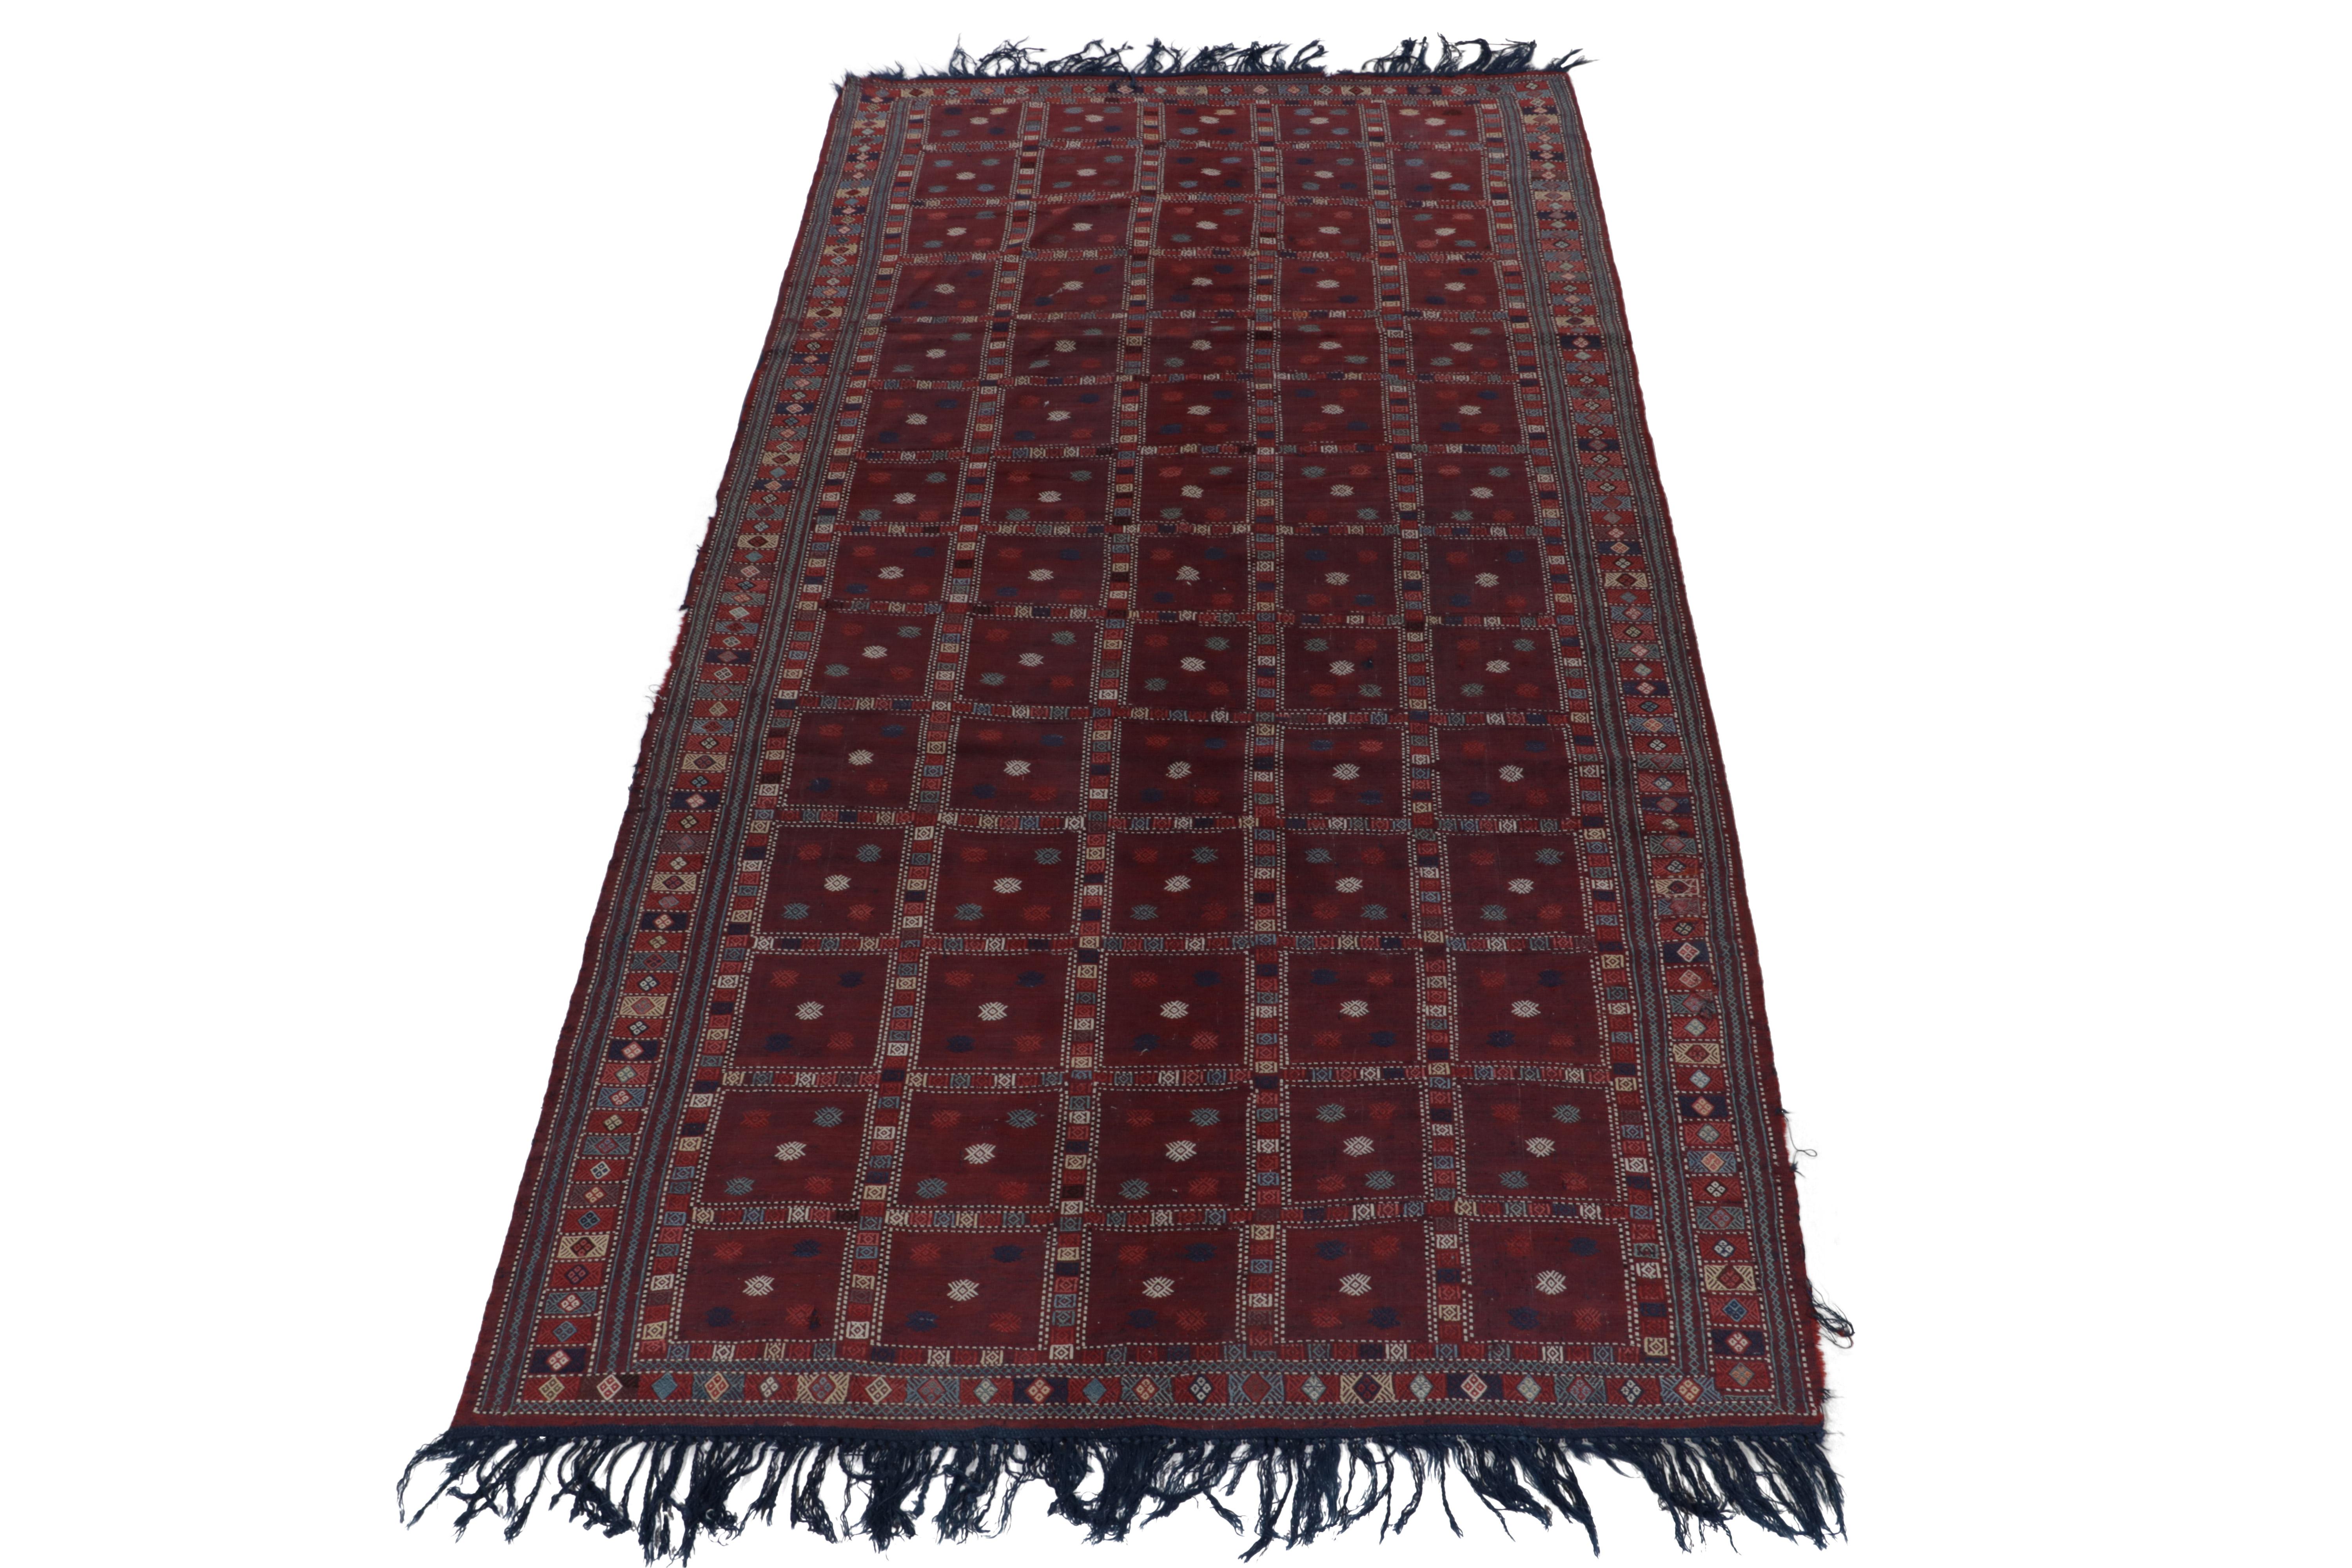 Handwoven in wool, a 6 x 12 antique Russian kilim exemplifying tribal Caucasian aesthetics—now entering Rug & Kilim’s flatweave selections. The deep wine and bordeaux red tones complement the simple geometry with light intricacies in aegean blue,